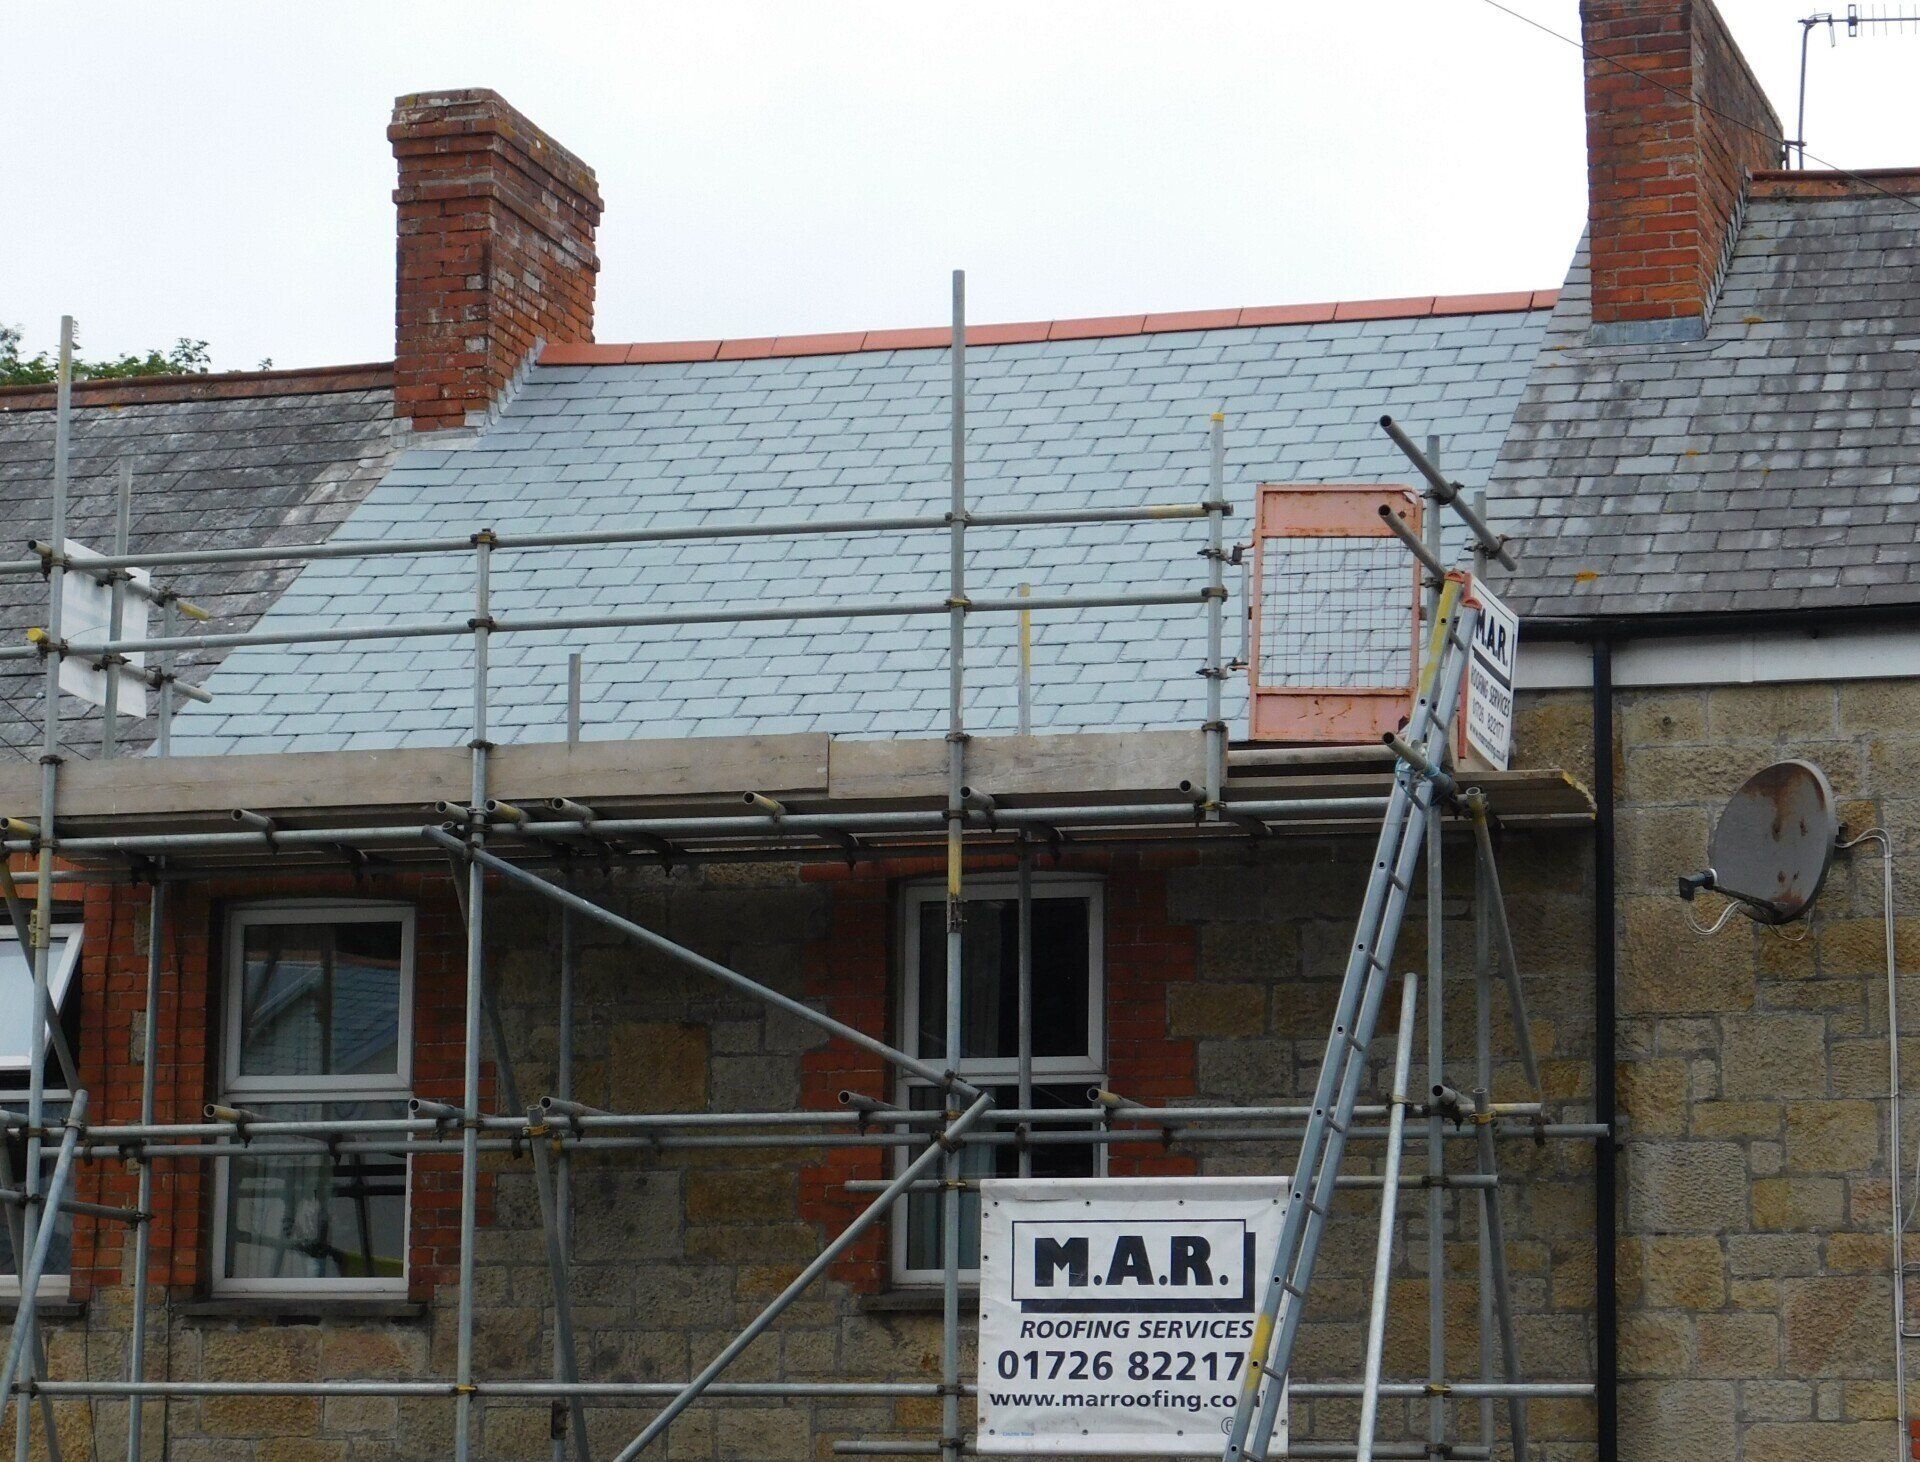 Thermal renovations, terraced house reroof, lead chimneys, shared chimney roofing works